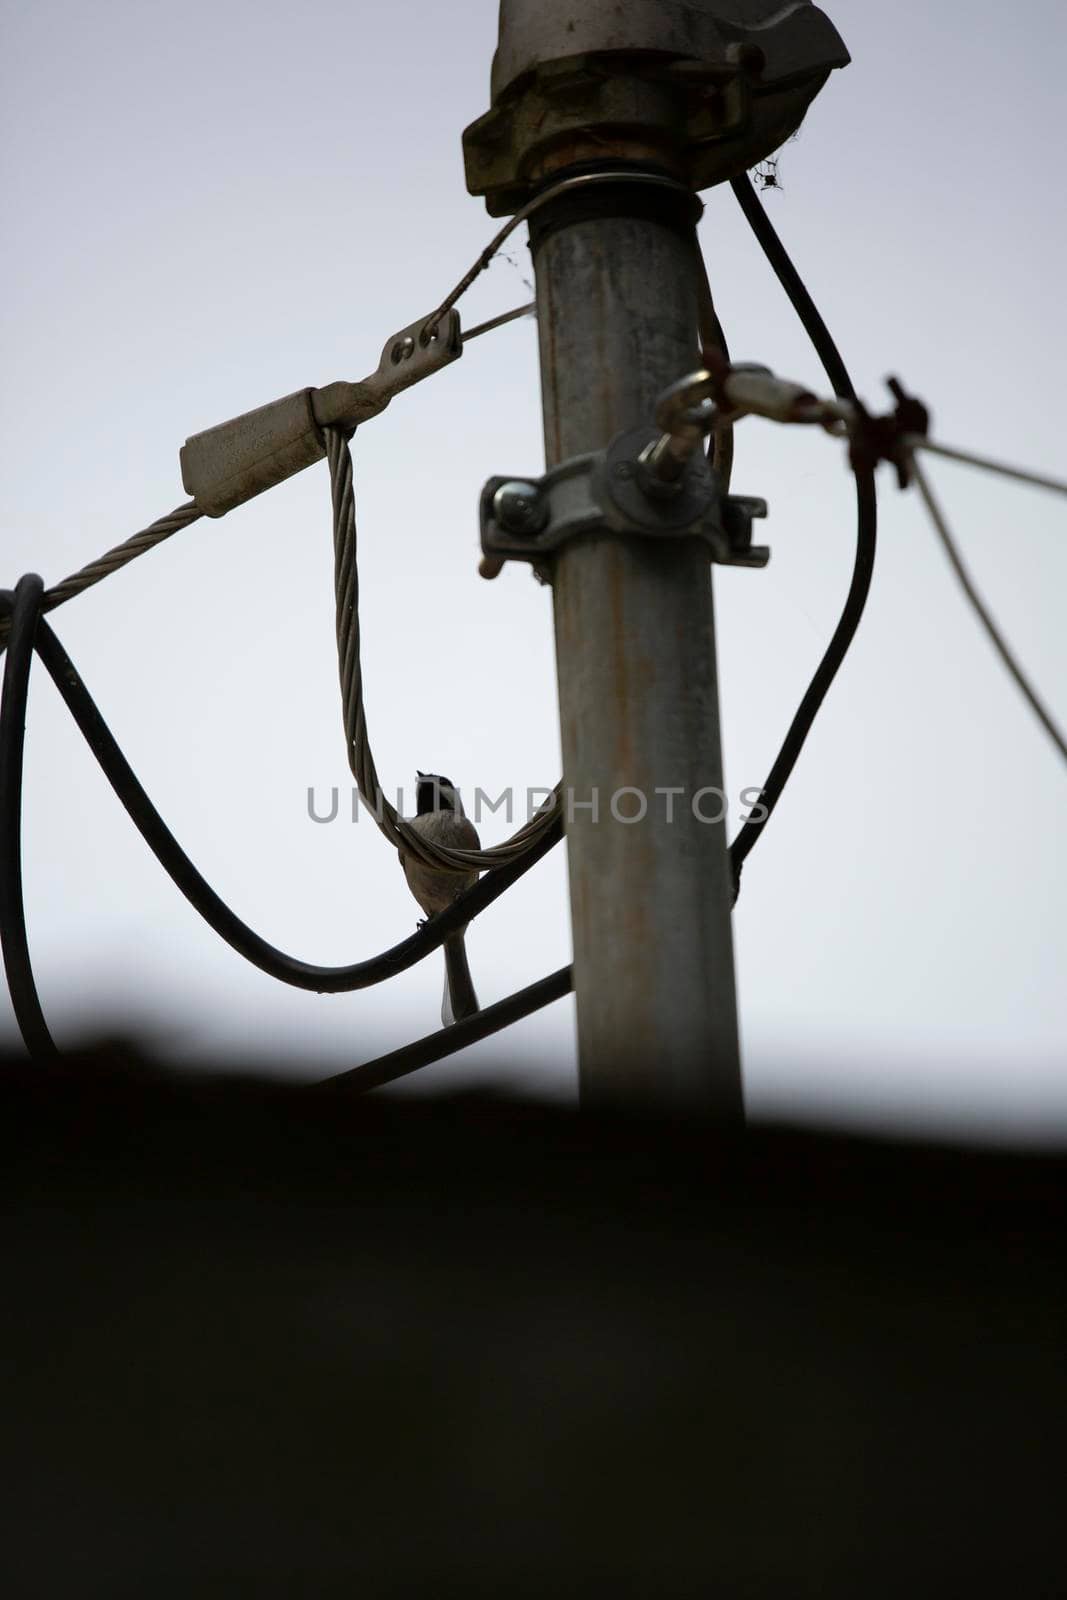 Black-capped chickadee (Poecile atricapillus) perched on an electrical wire